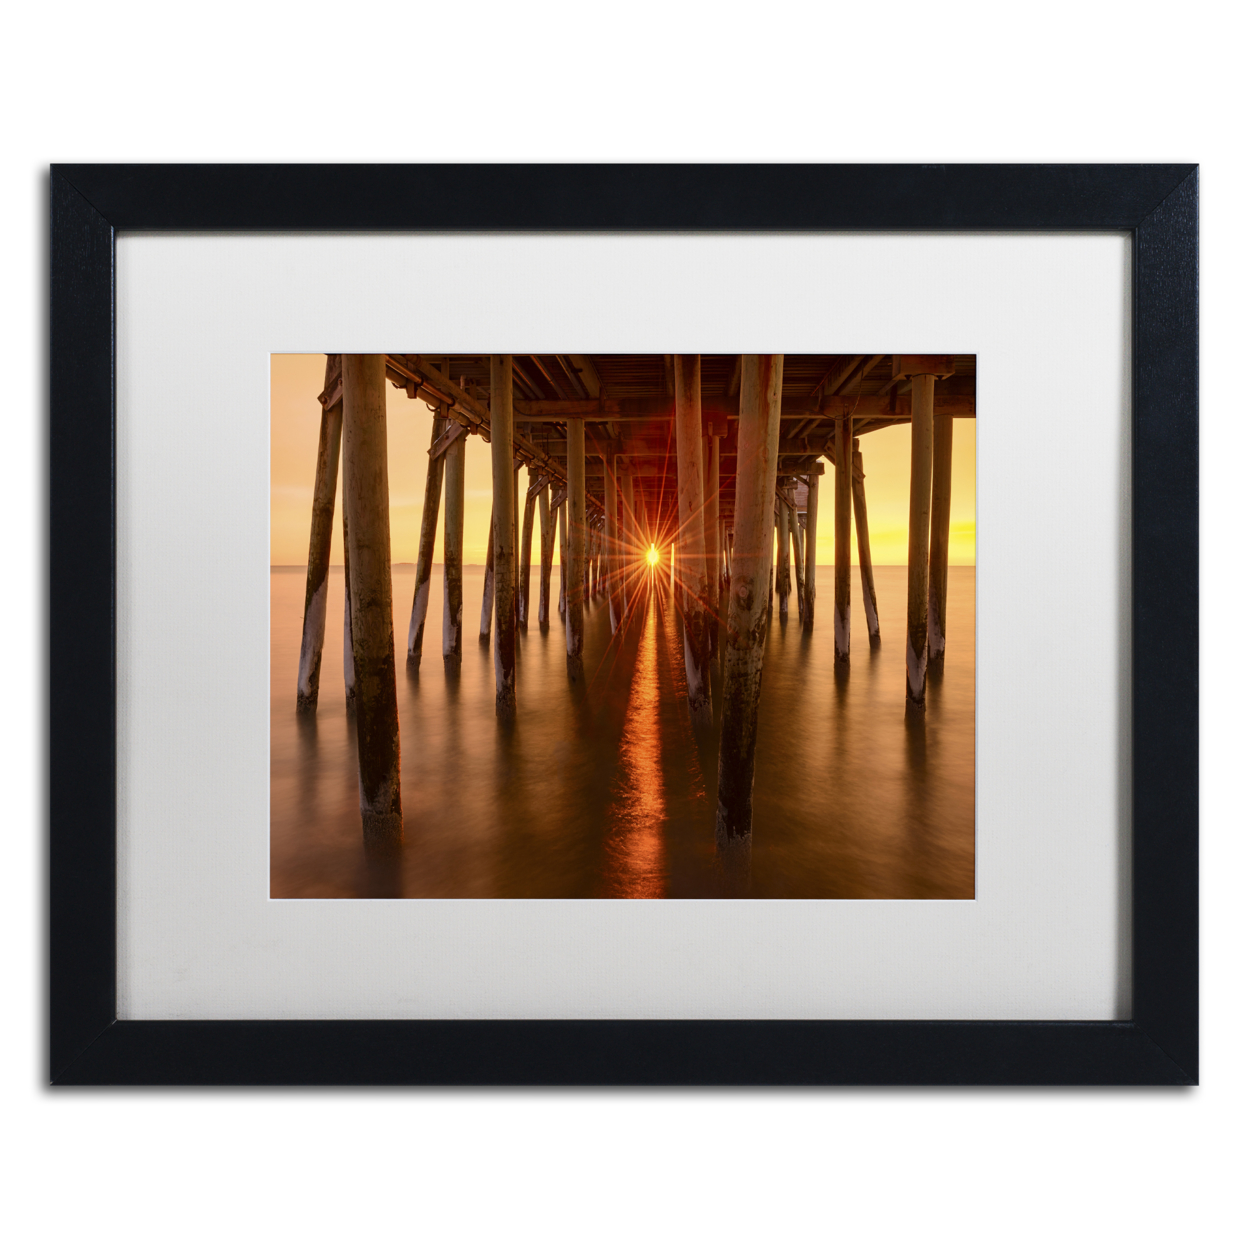 Michael Blanchette Photography 'Under The Pier' Black Wooden Framed Art 18 X 22 Inches